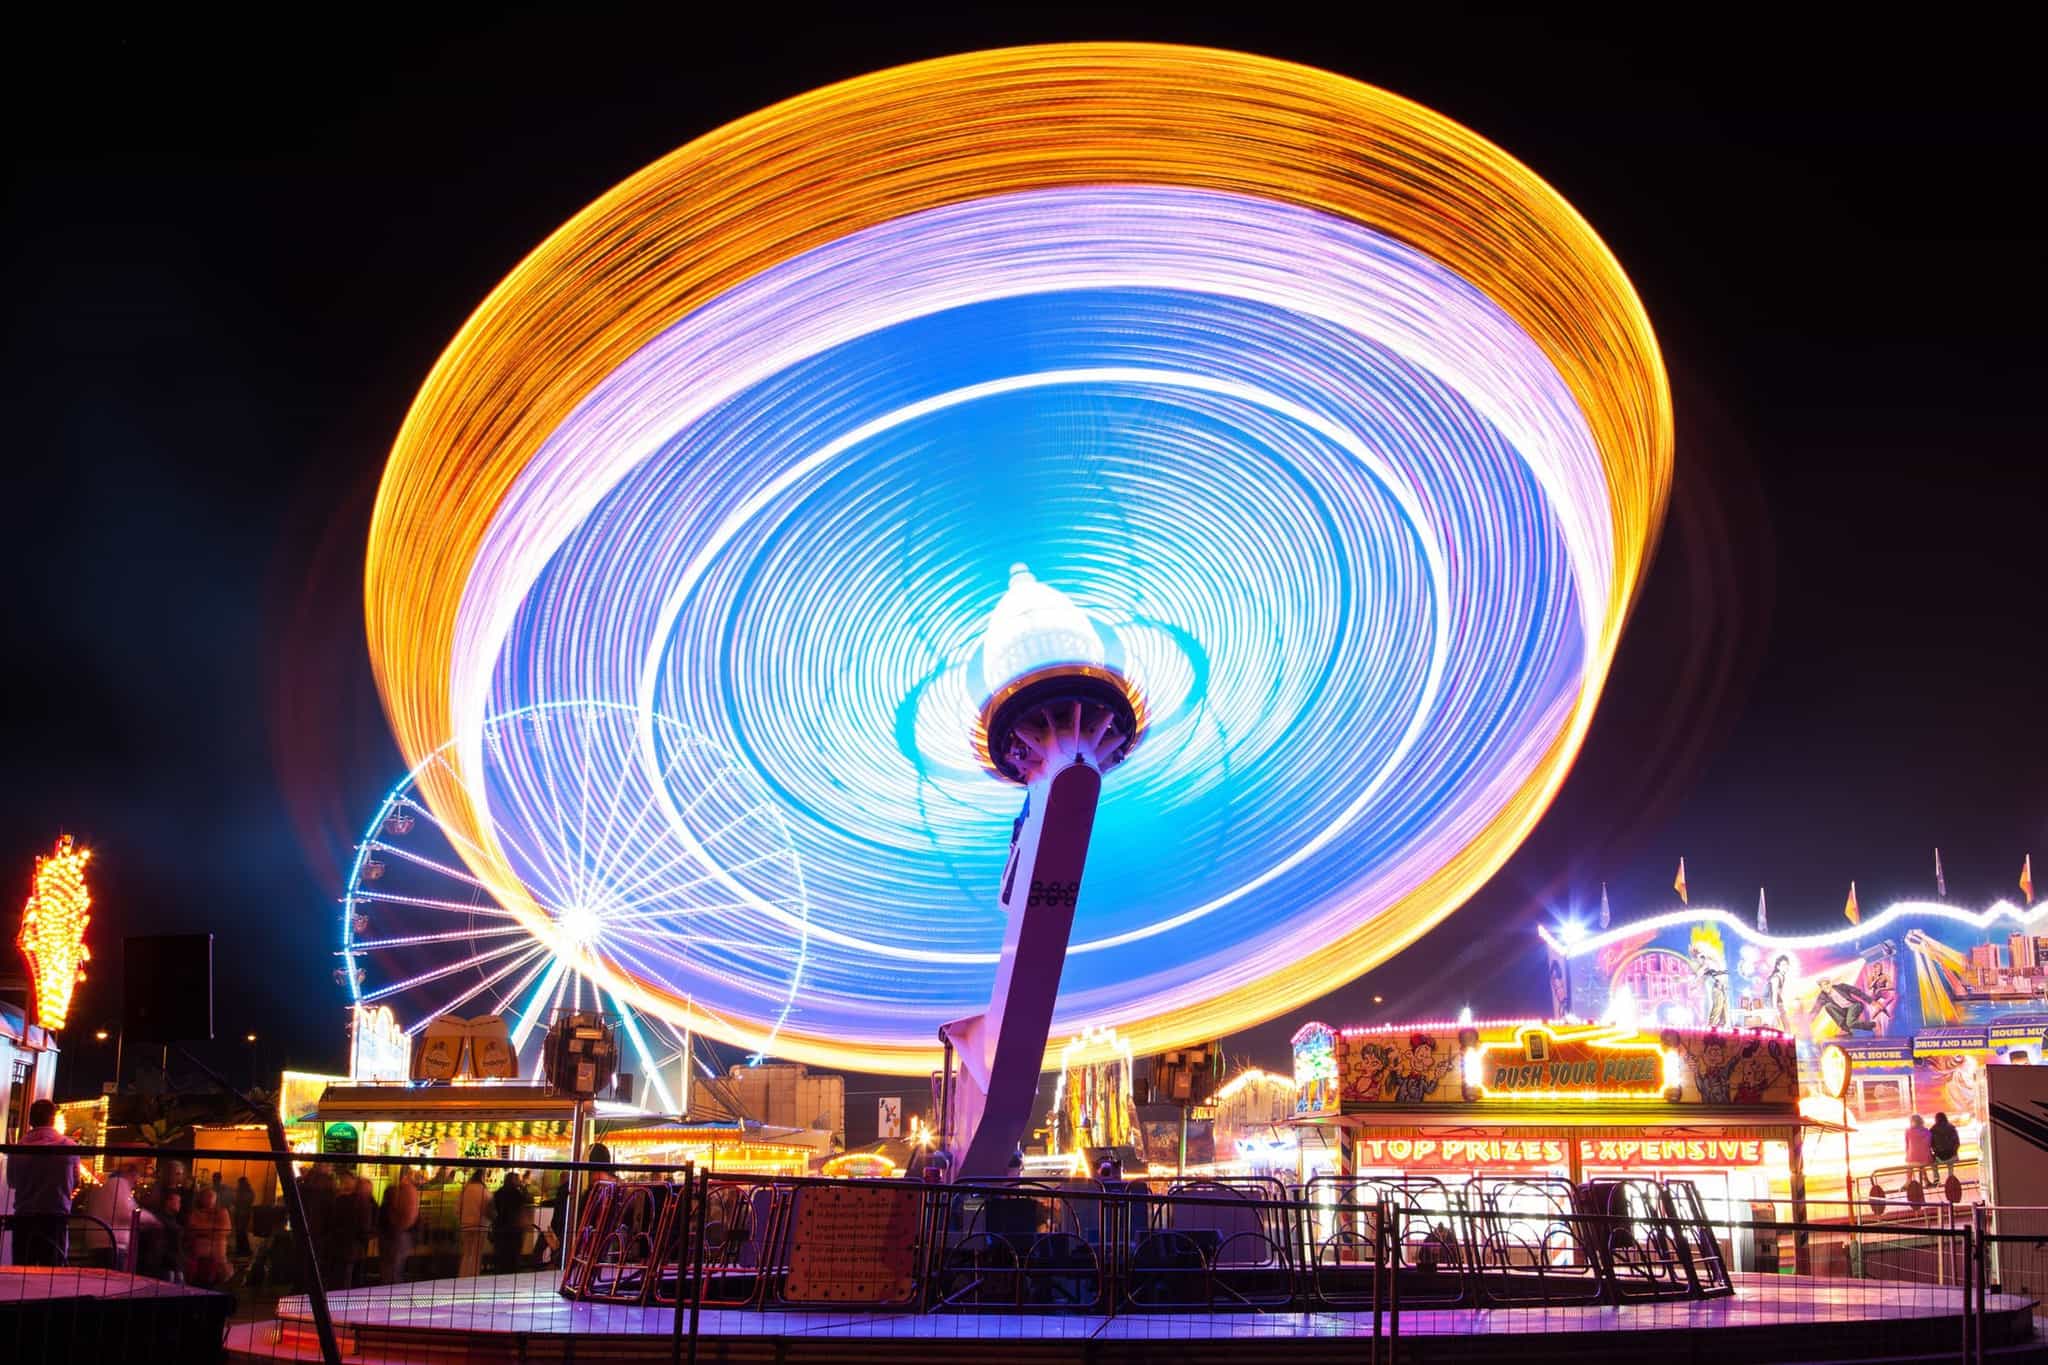 spinning carnival ride lit up at night; roller coaster accidents attorneys, carnival ride accidents